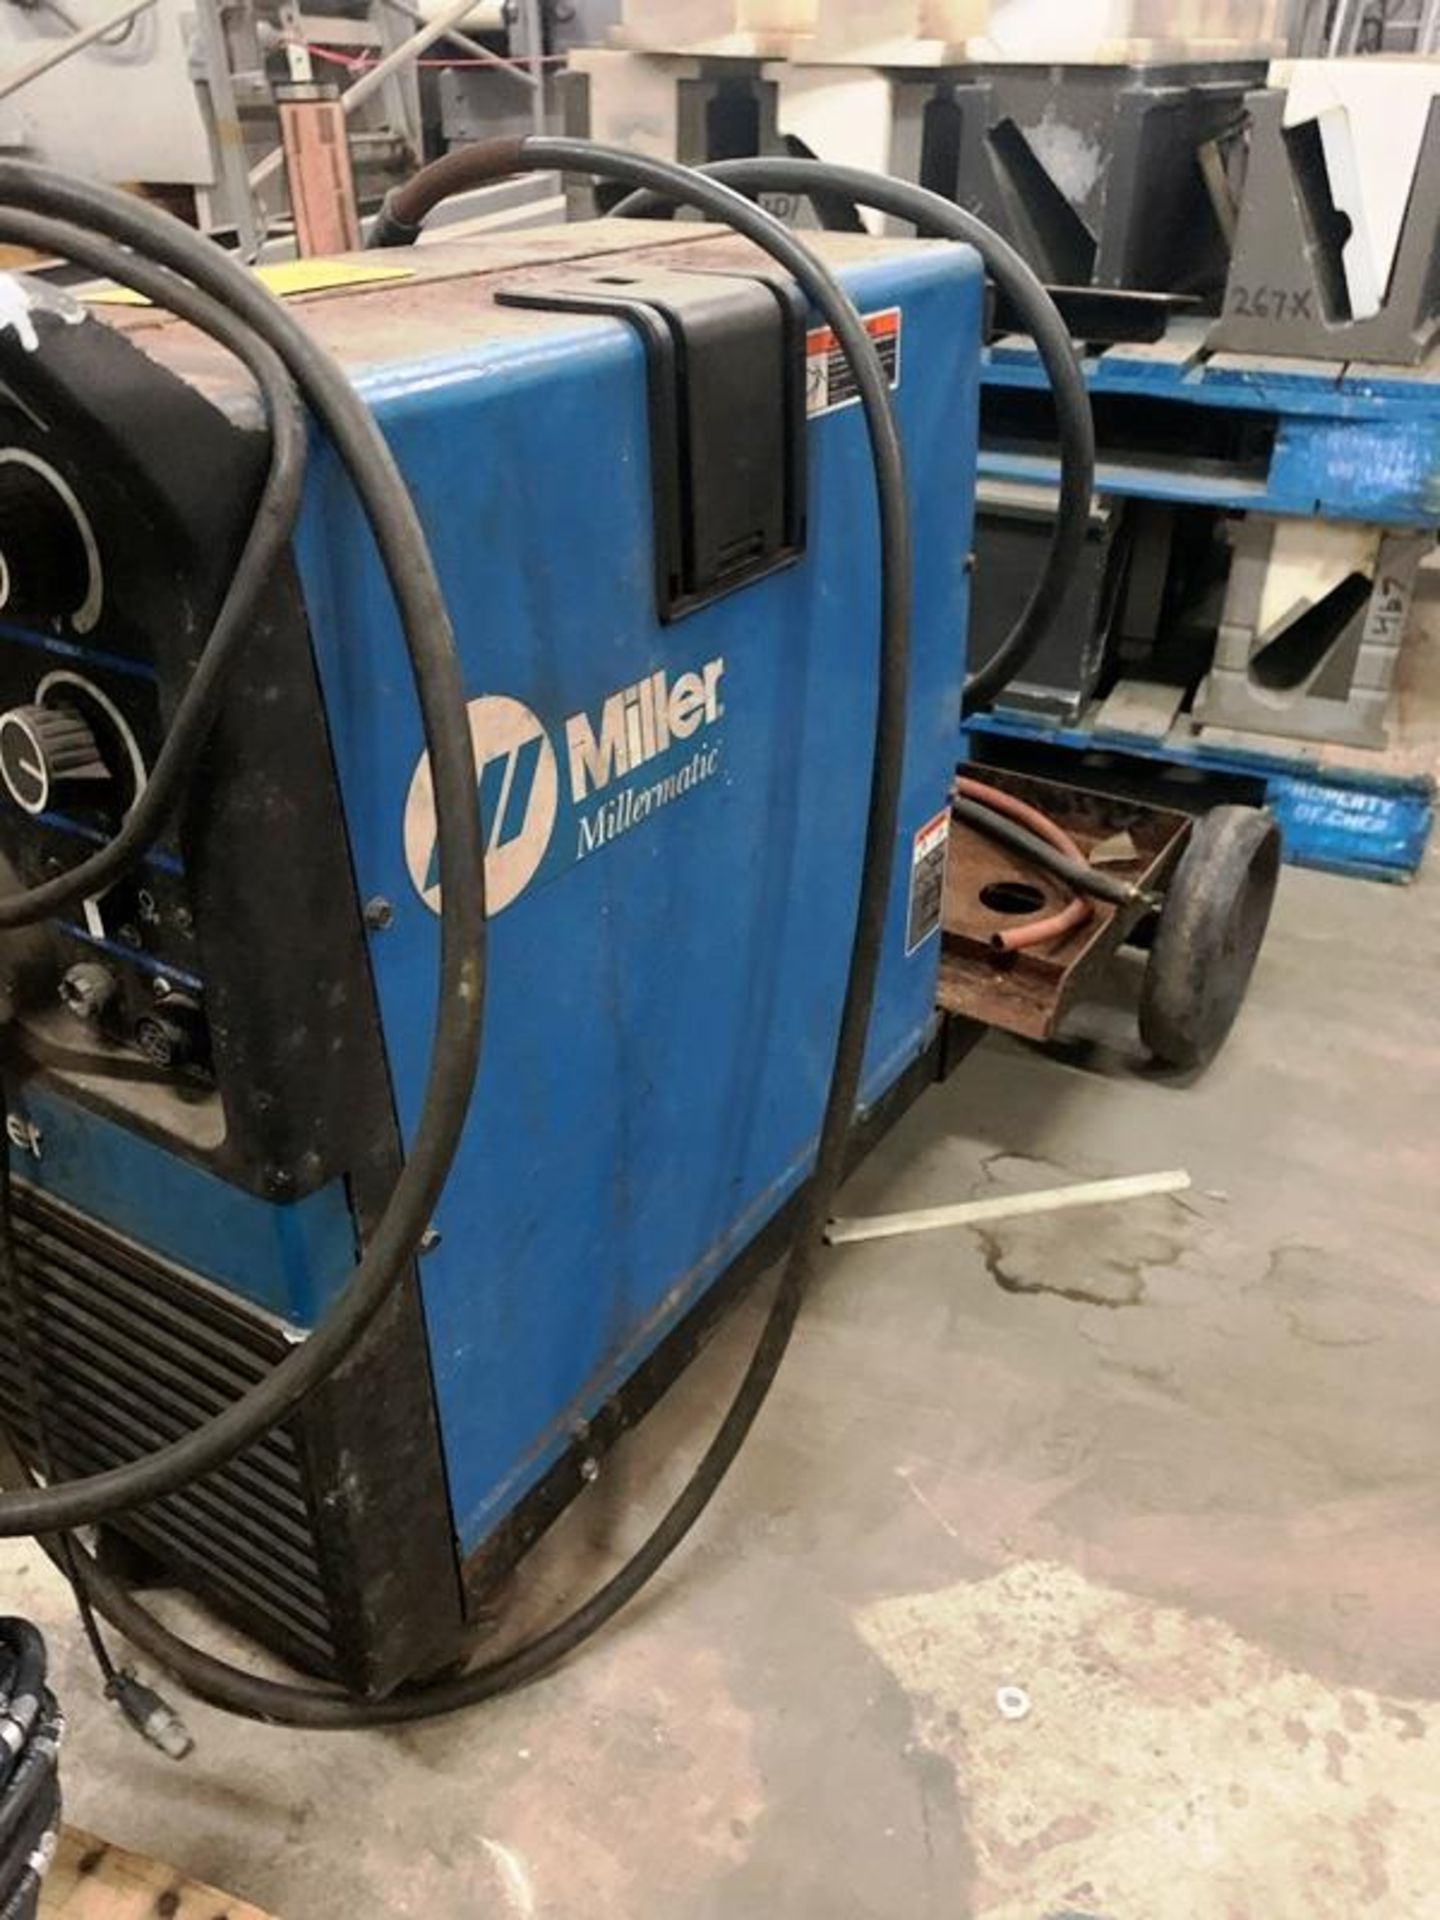 Miller Matic 251 Welder, Ser. #LB242869m 200/230 volts, 1 phase (Located in Sandwich, IL) - Image 4 of 6